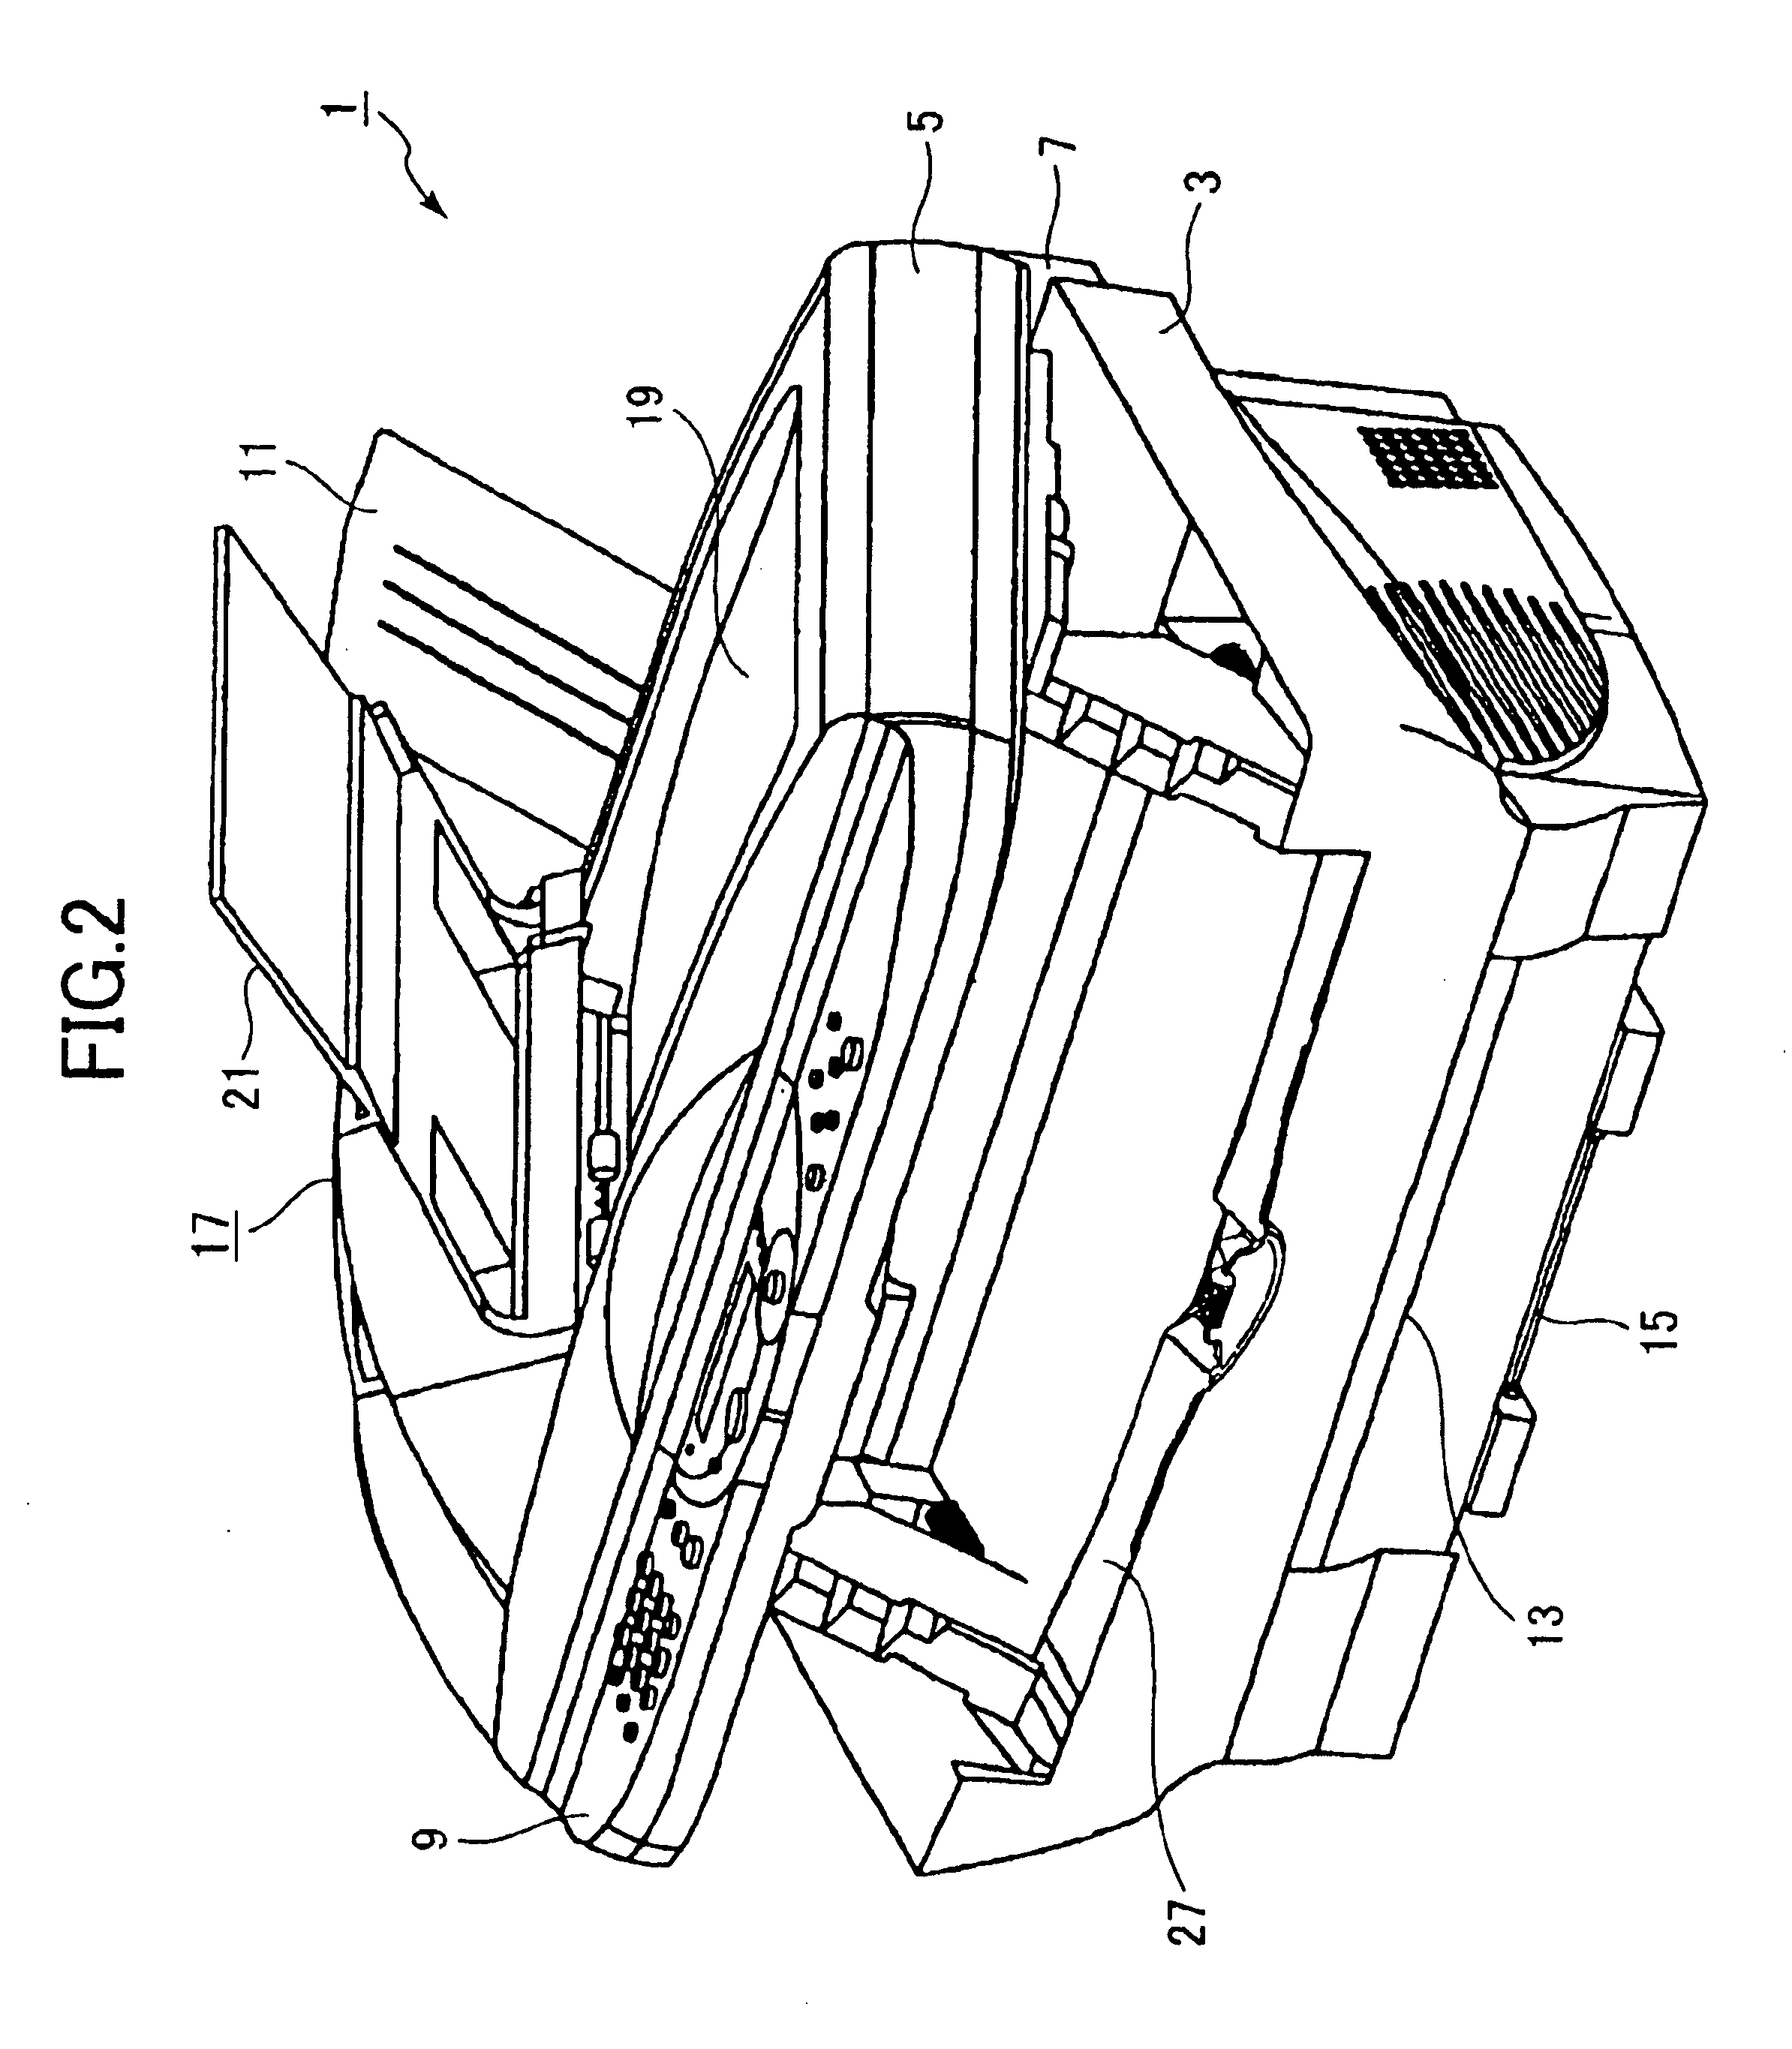 Image forming device including mechanism to lock cover